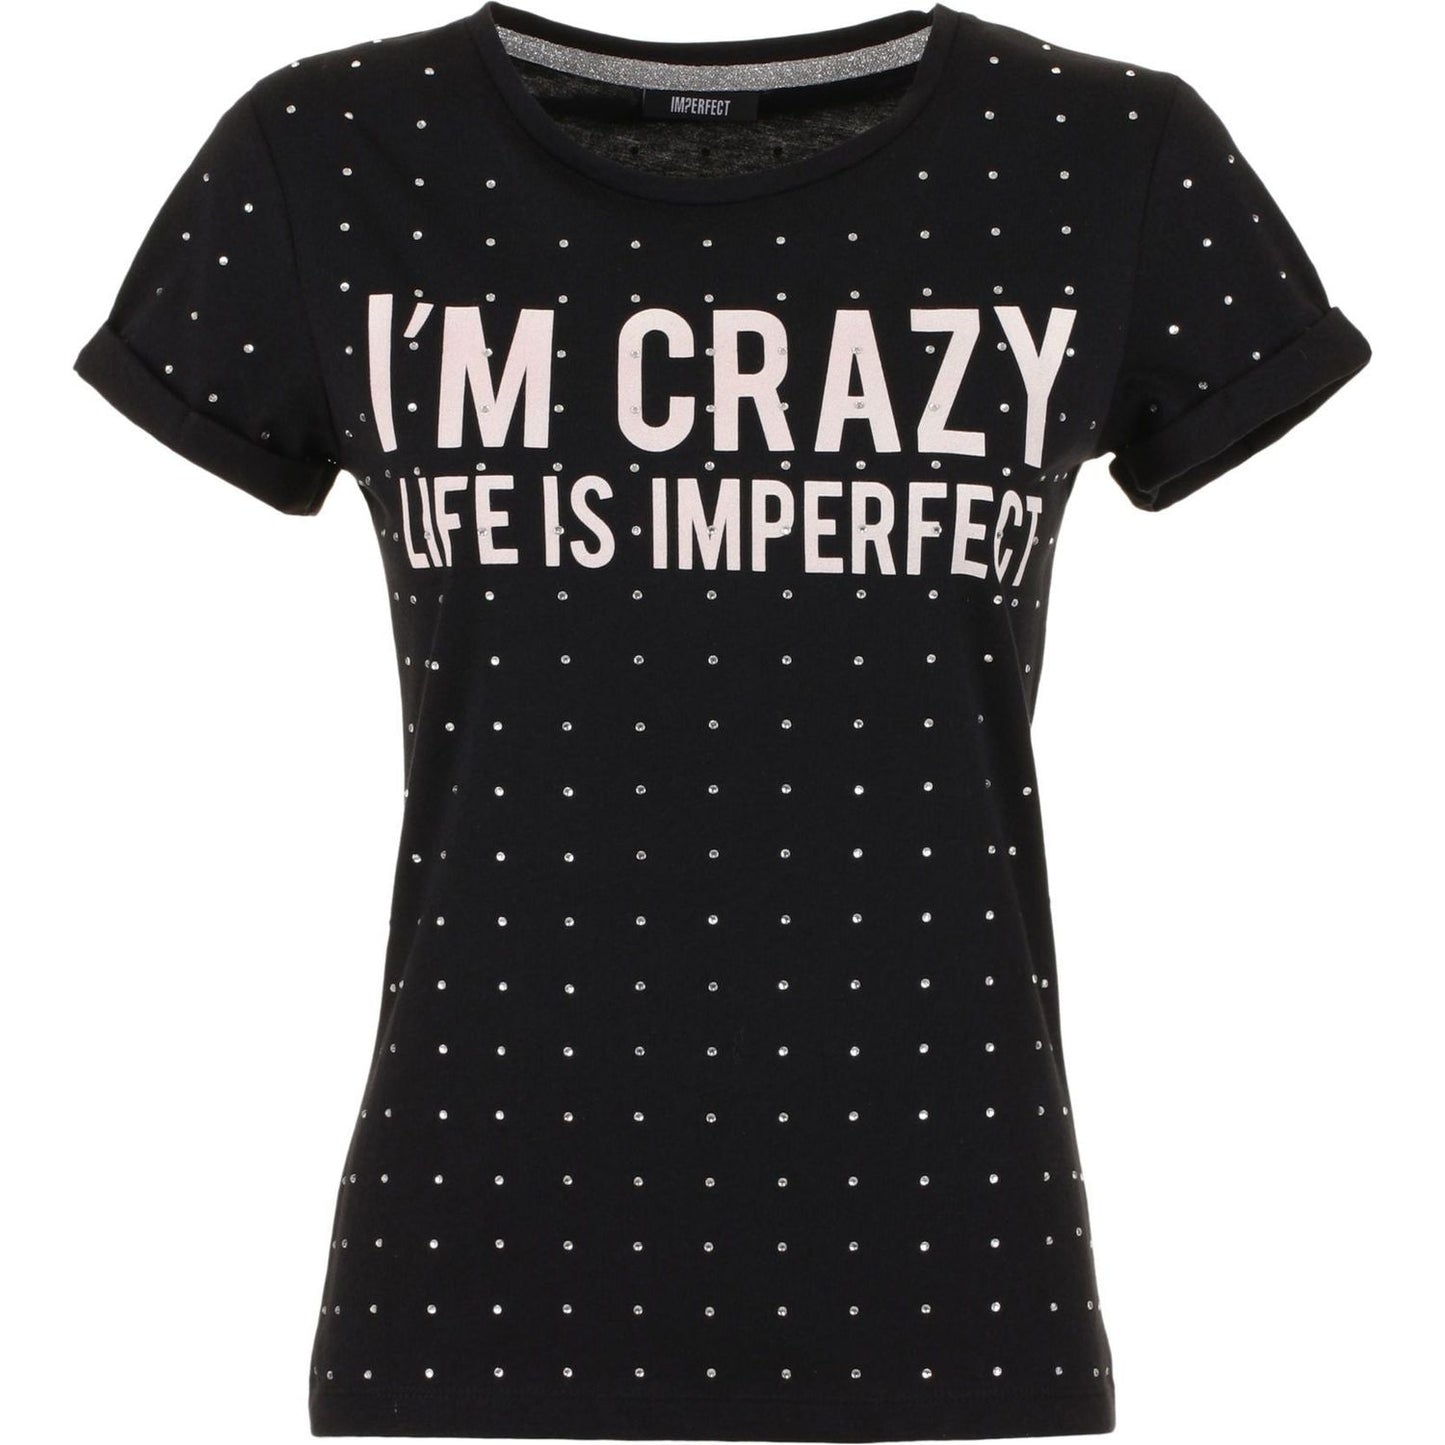 Imperfect Chic Imperfect Cotton Tee with Brass Detail WOMAN T-SHIRTS tg-nero-imperfect-tops-t-shirt